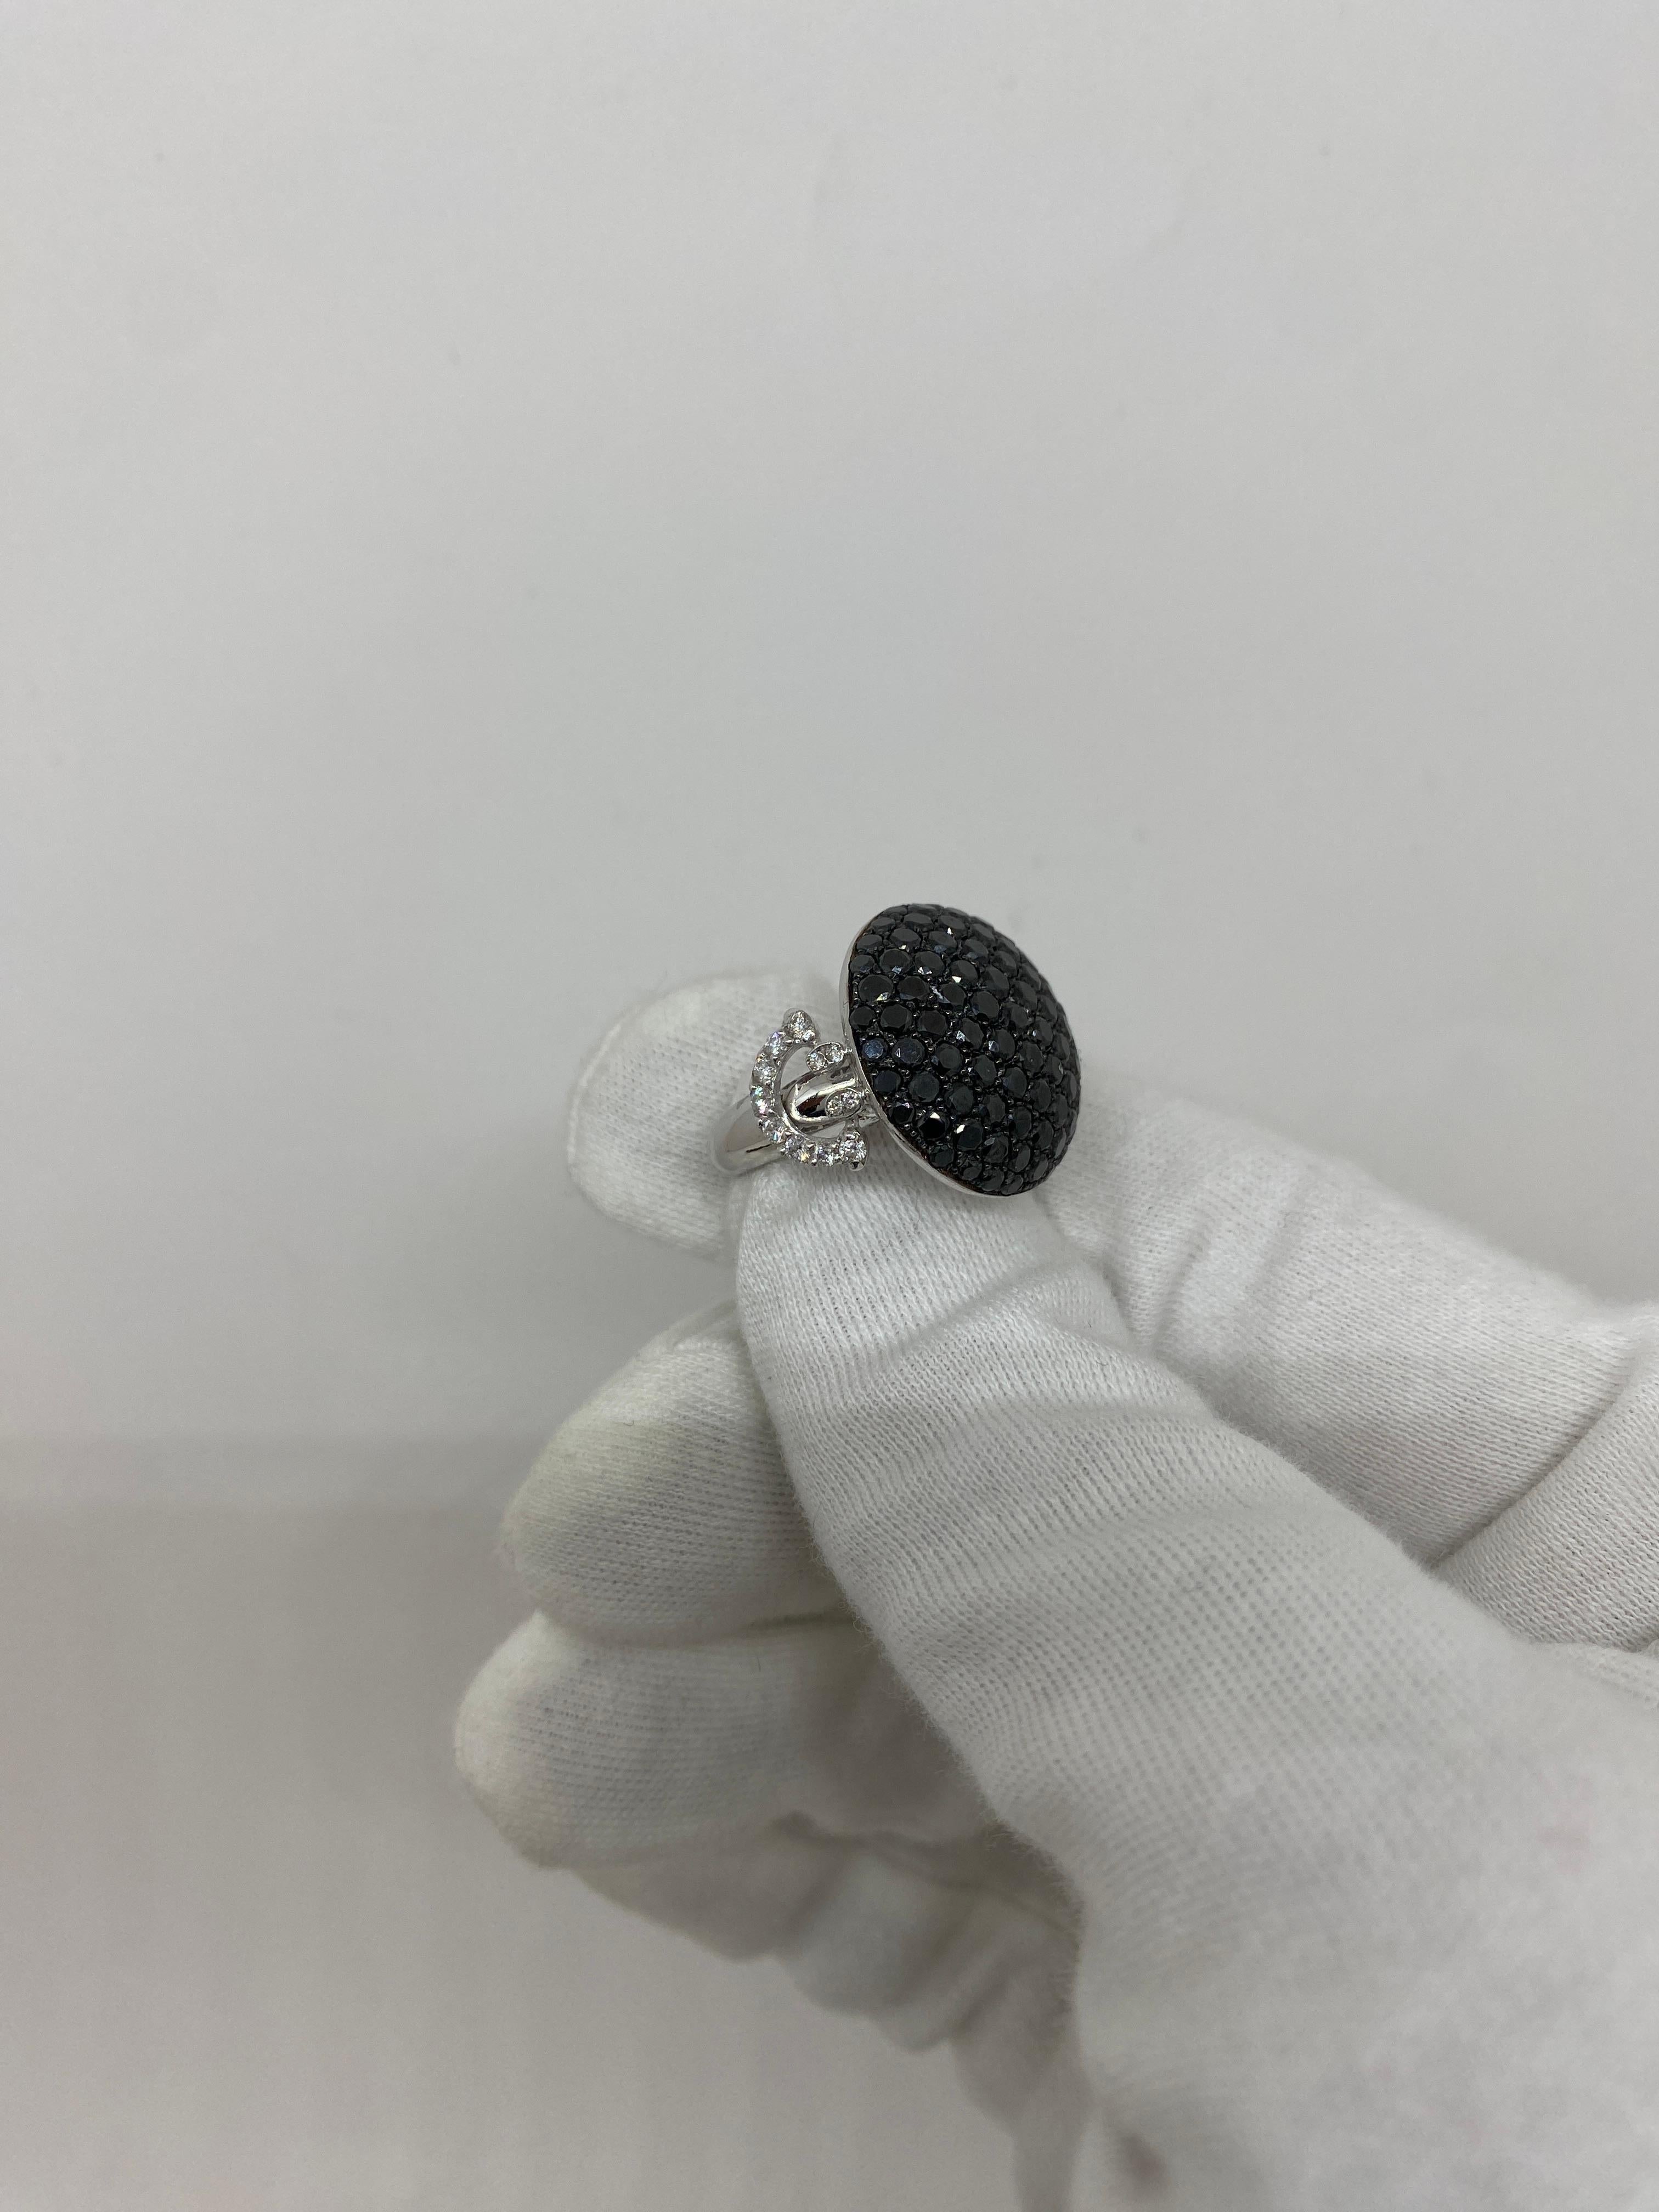 18 kt white gold ring paved with natural black brilliant-cut diamonds and side smiley in natural white brilliant-cut diamonds

Welcome to our jewelry collection, where every piece tells a story of timeless elegance and unparalleled craftsmanship. As